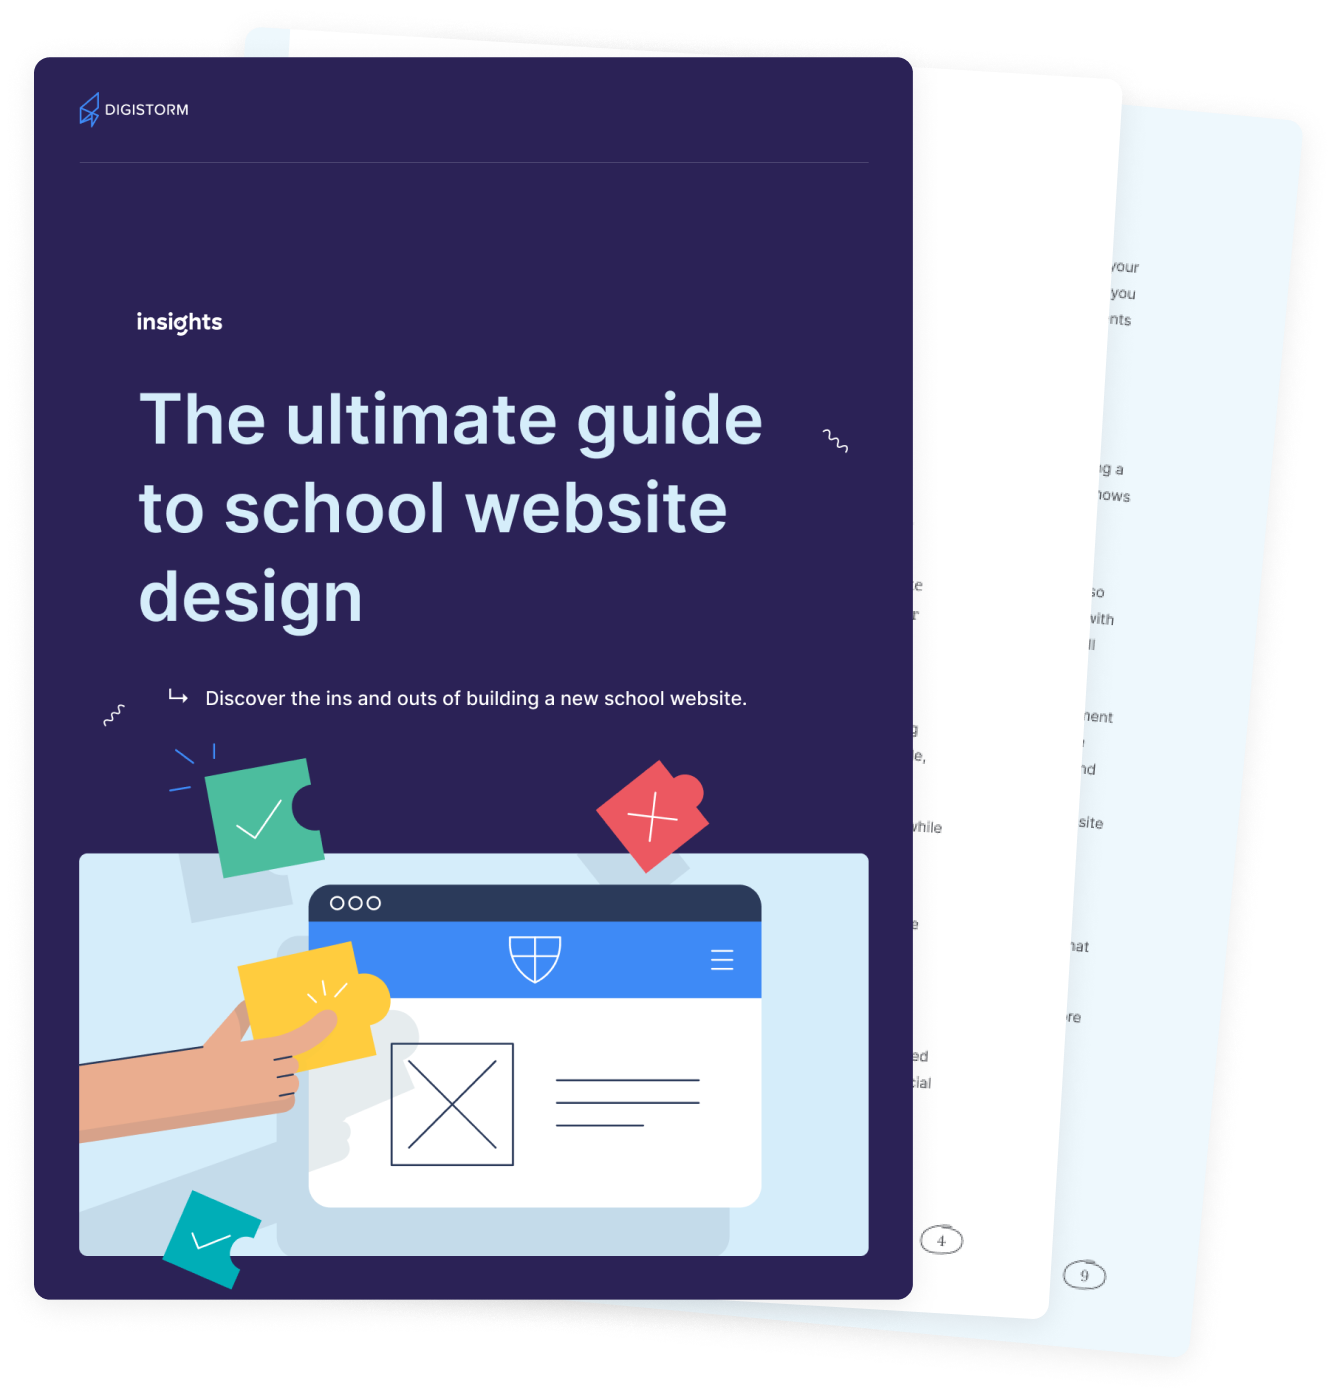 The ultimate guide to school website design - guide cover